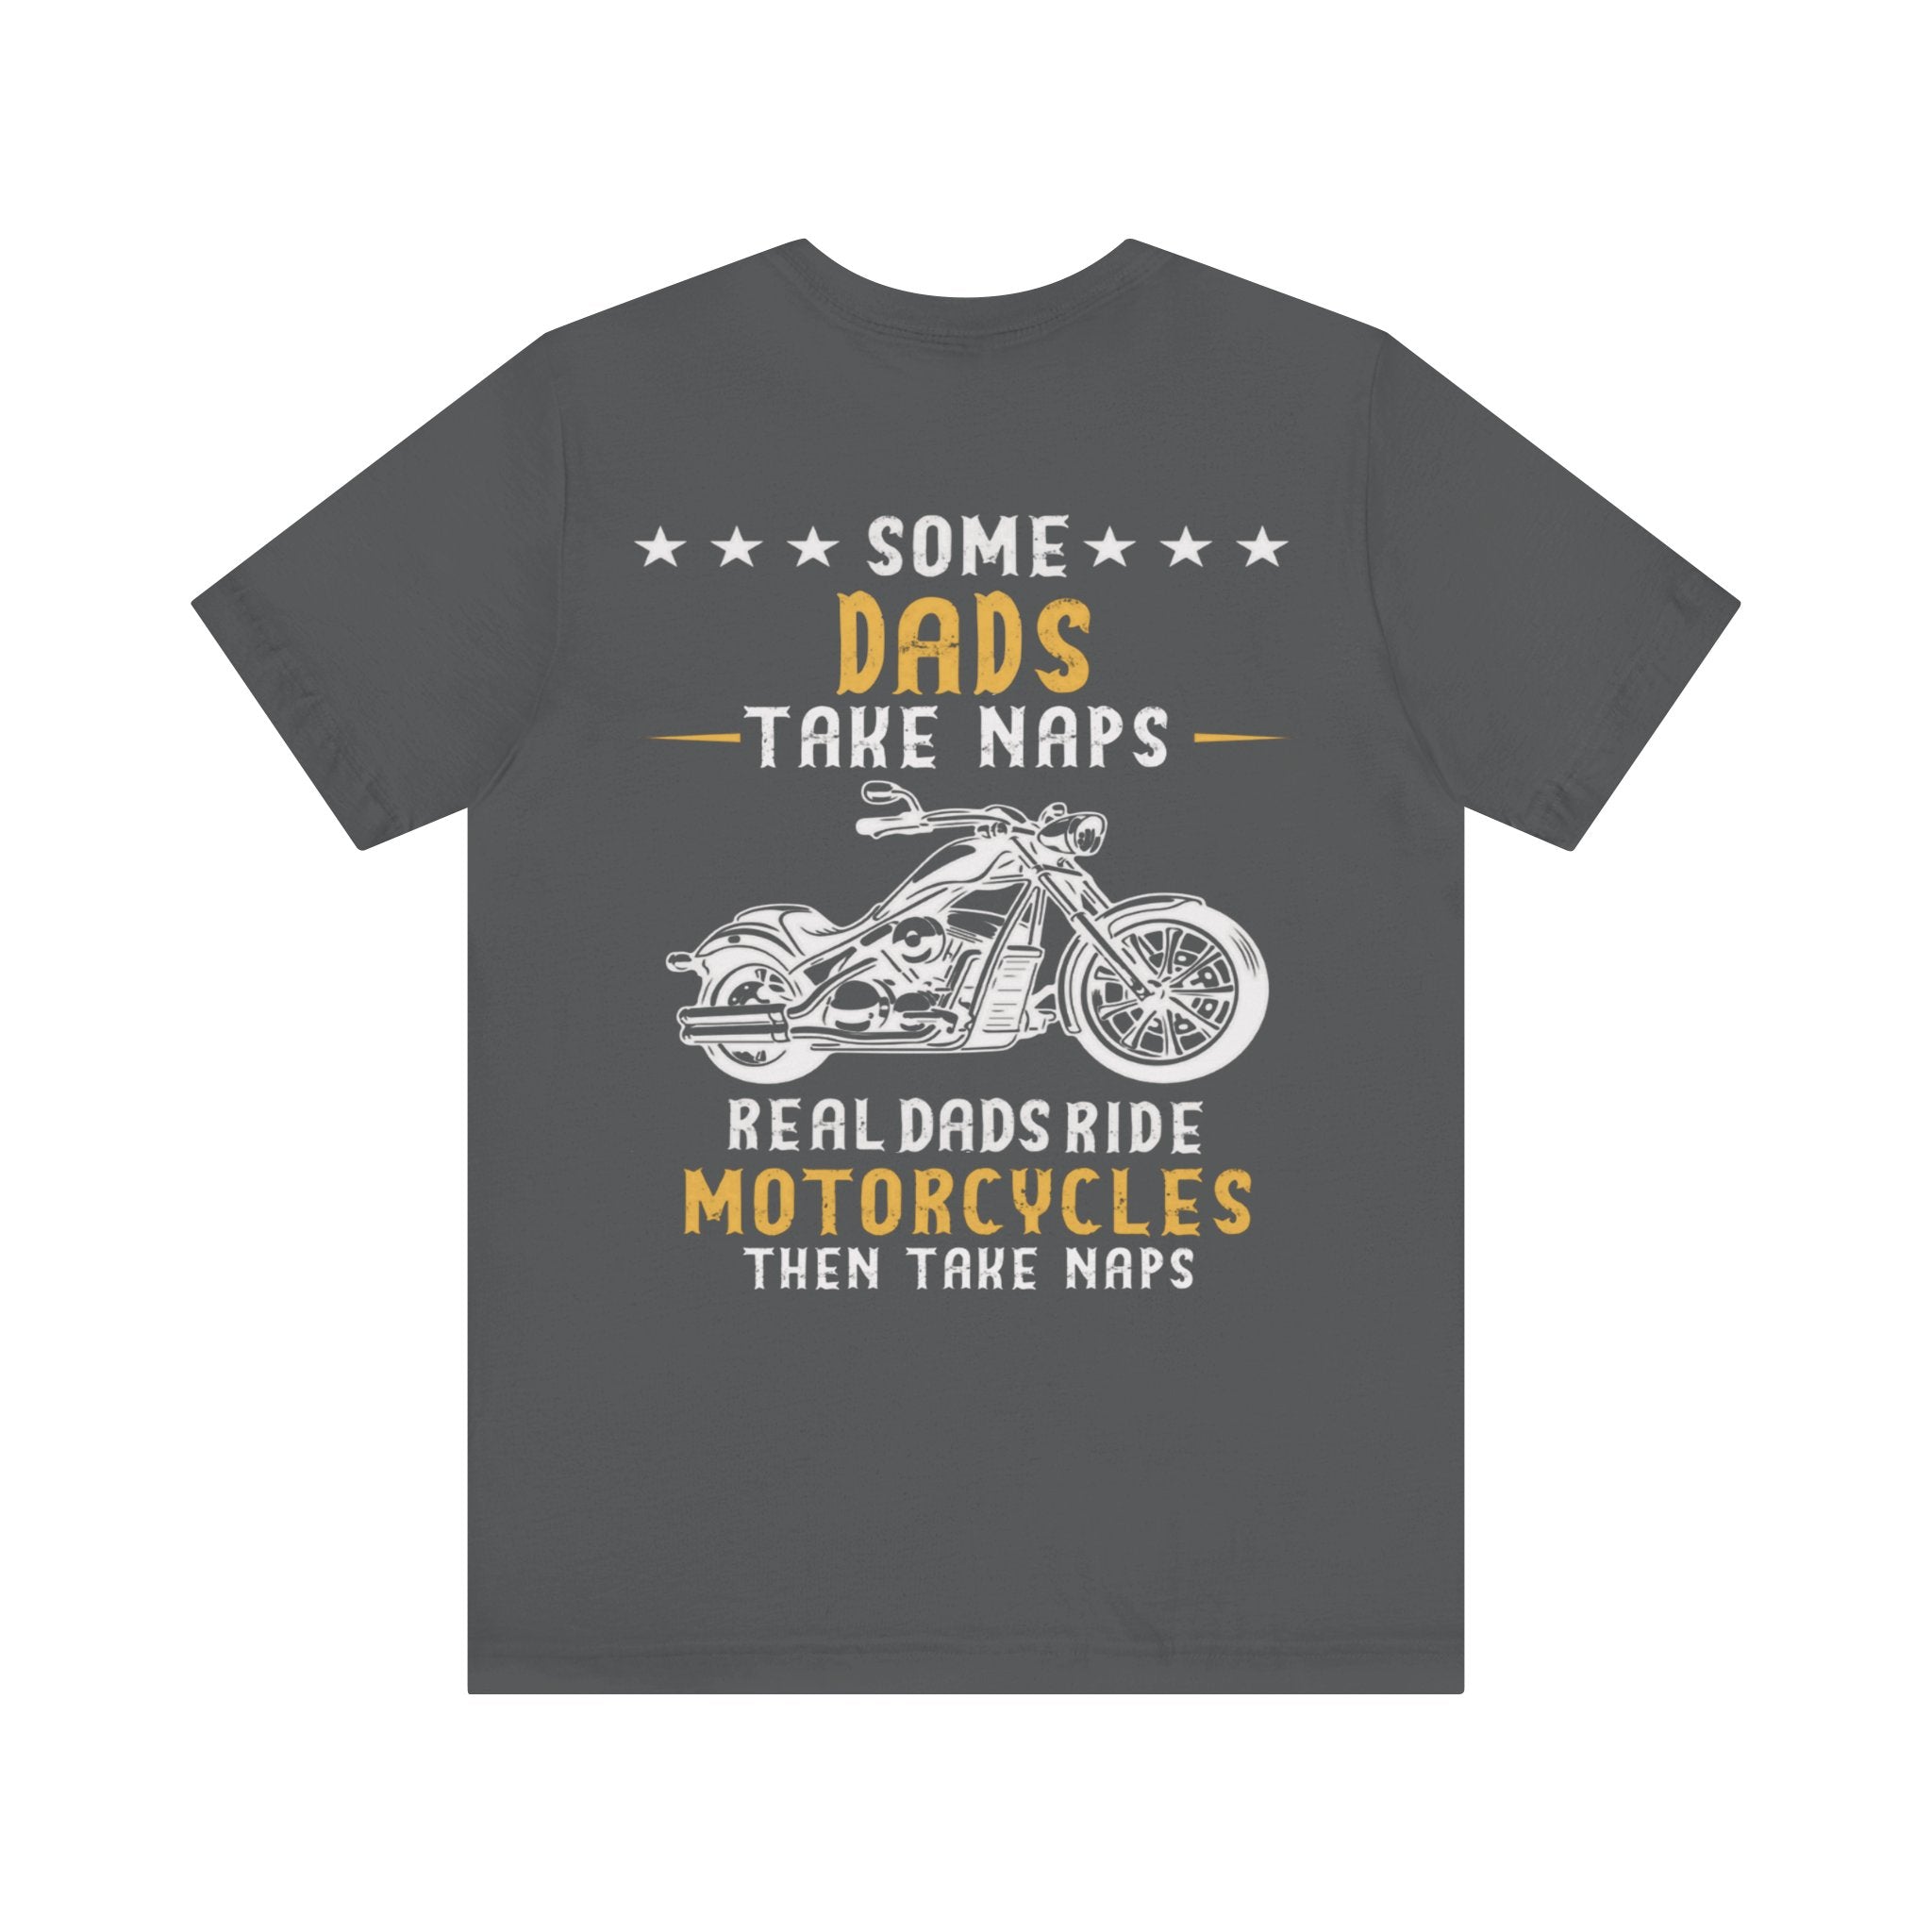 Kate McEnroe New York Biker Dad Shirt For Fathers day, Birthday Gift, Real Dads Ride Motorcycles Then Take Naps Shirt, Funny Biker Shirt, Dad GiftT - Shirt25214018248456695215